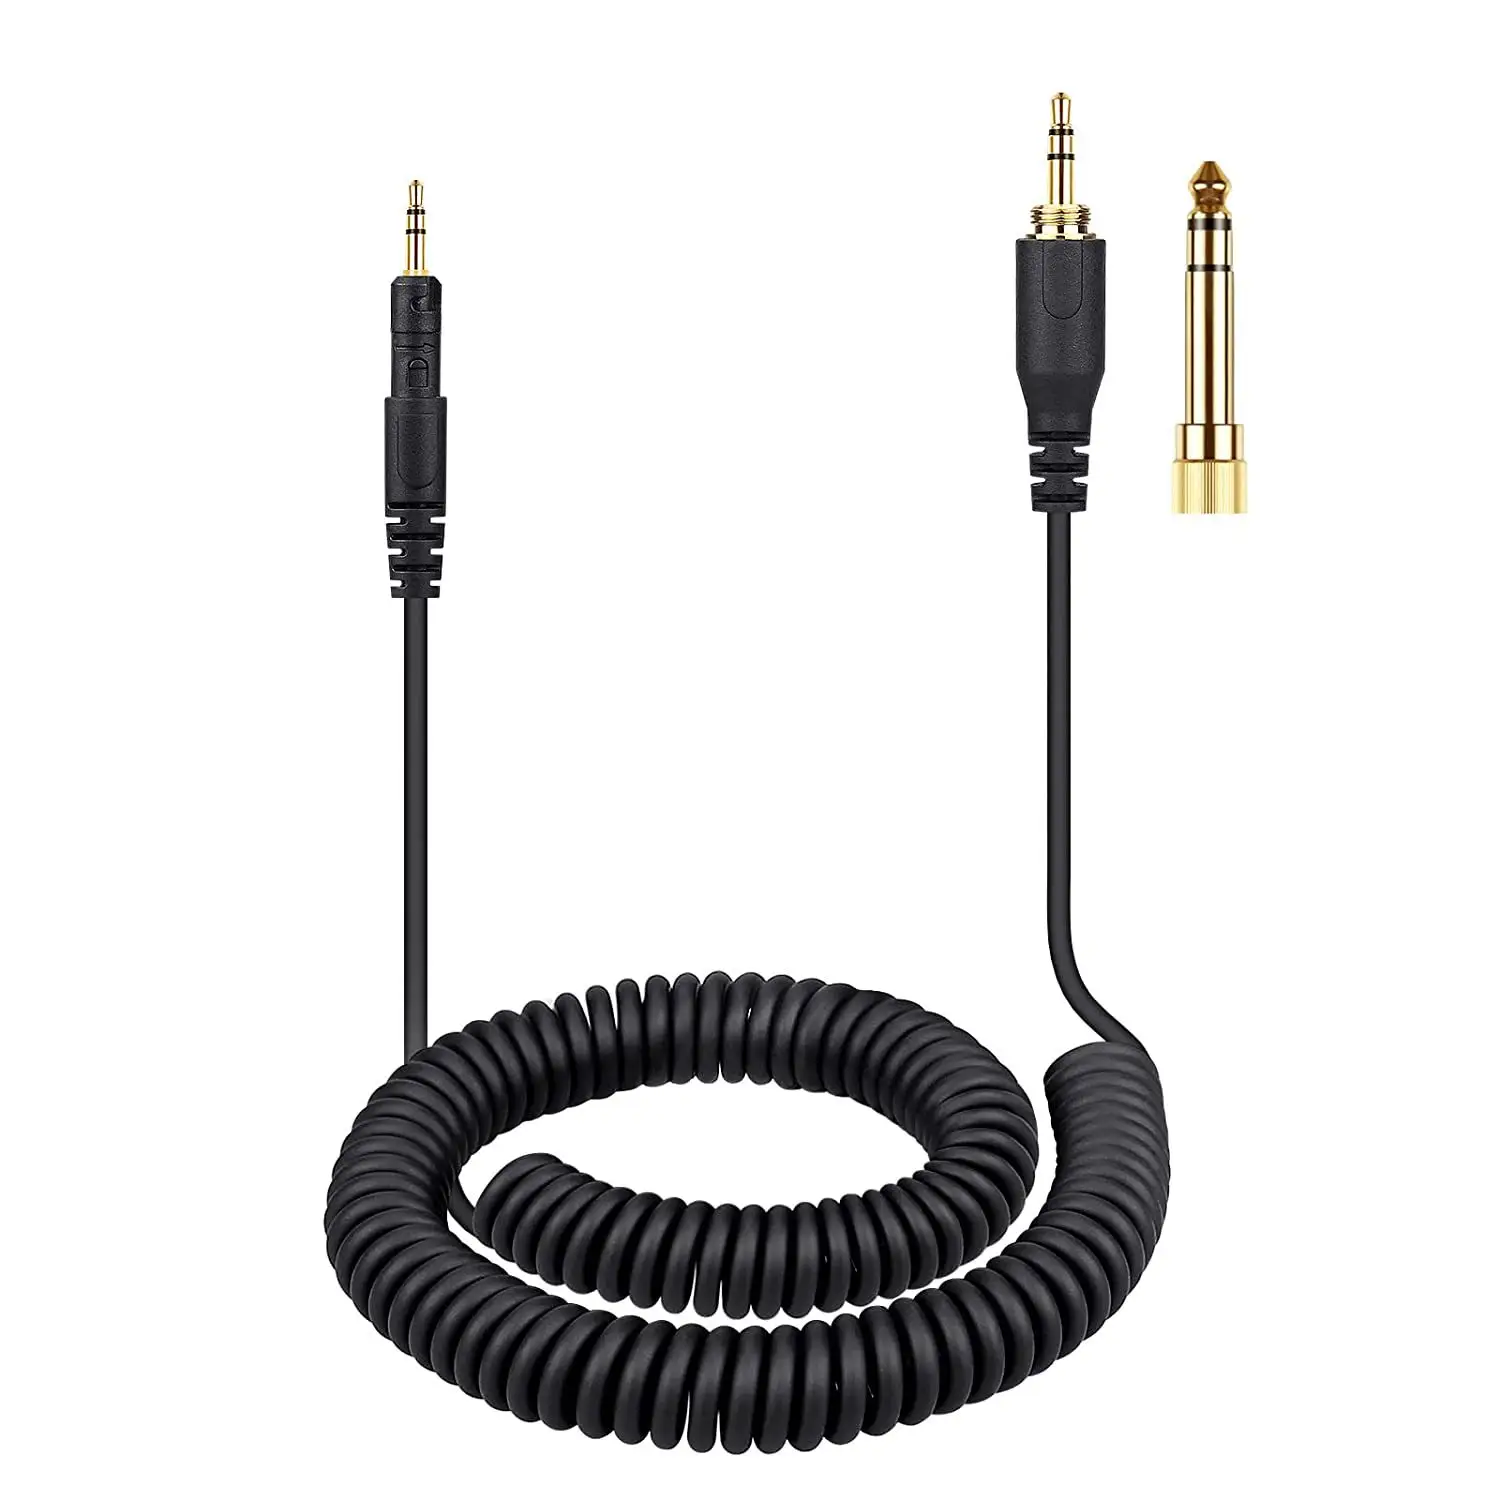 Replacement Cable For Audio ATH-M50X M40X M60X M70X Headphones Fits Many Headphones 6.35mm conversion